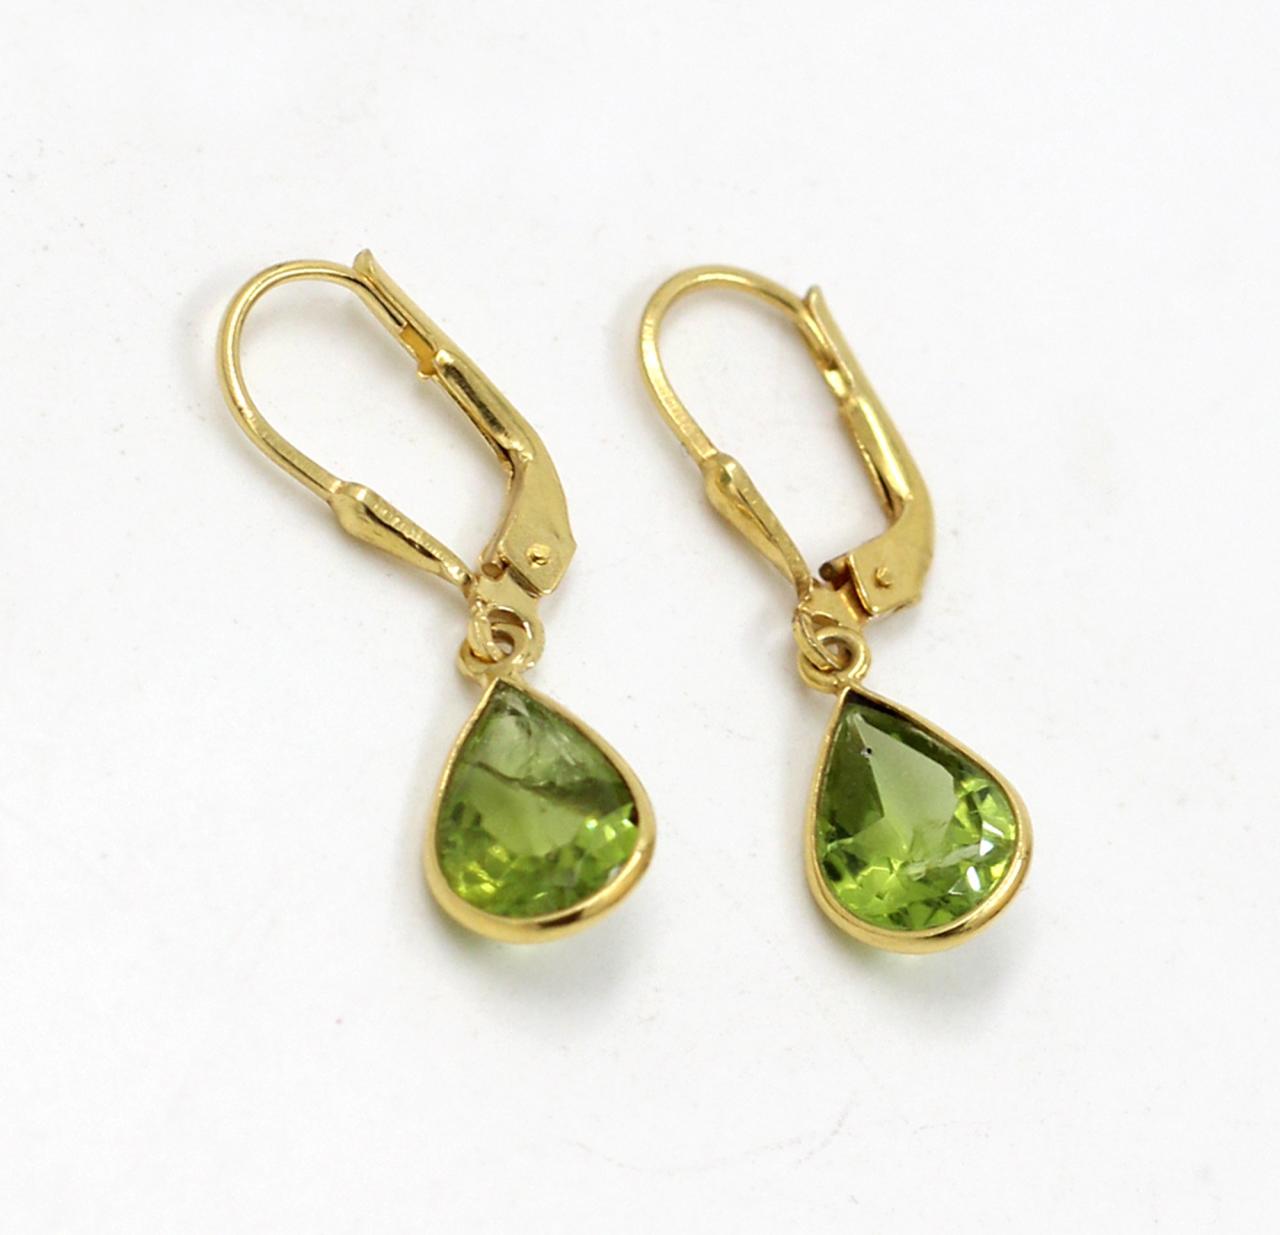 Genuine Natural Peridot Gemstone Lever Back Earring,solid 925 Sterling Silver Jewelry,birthday Chirstmas Gift Earring